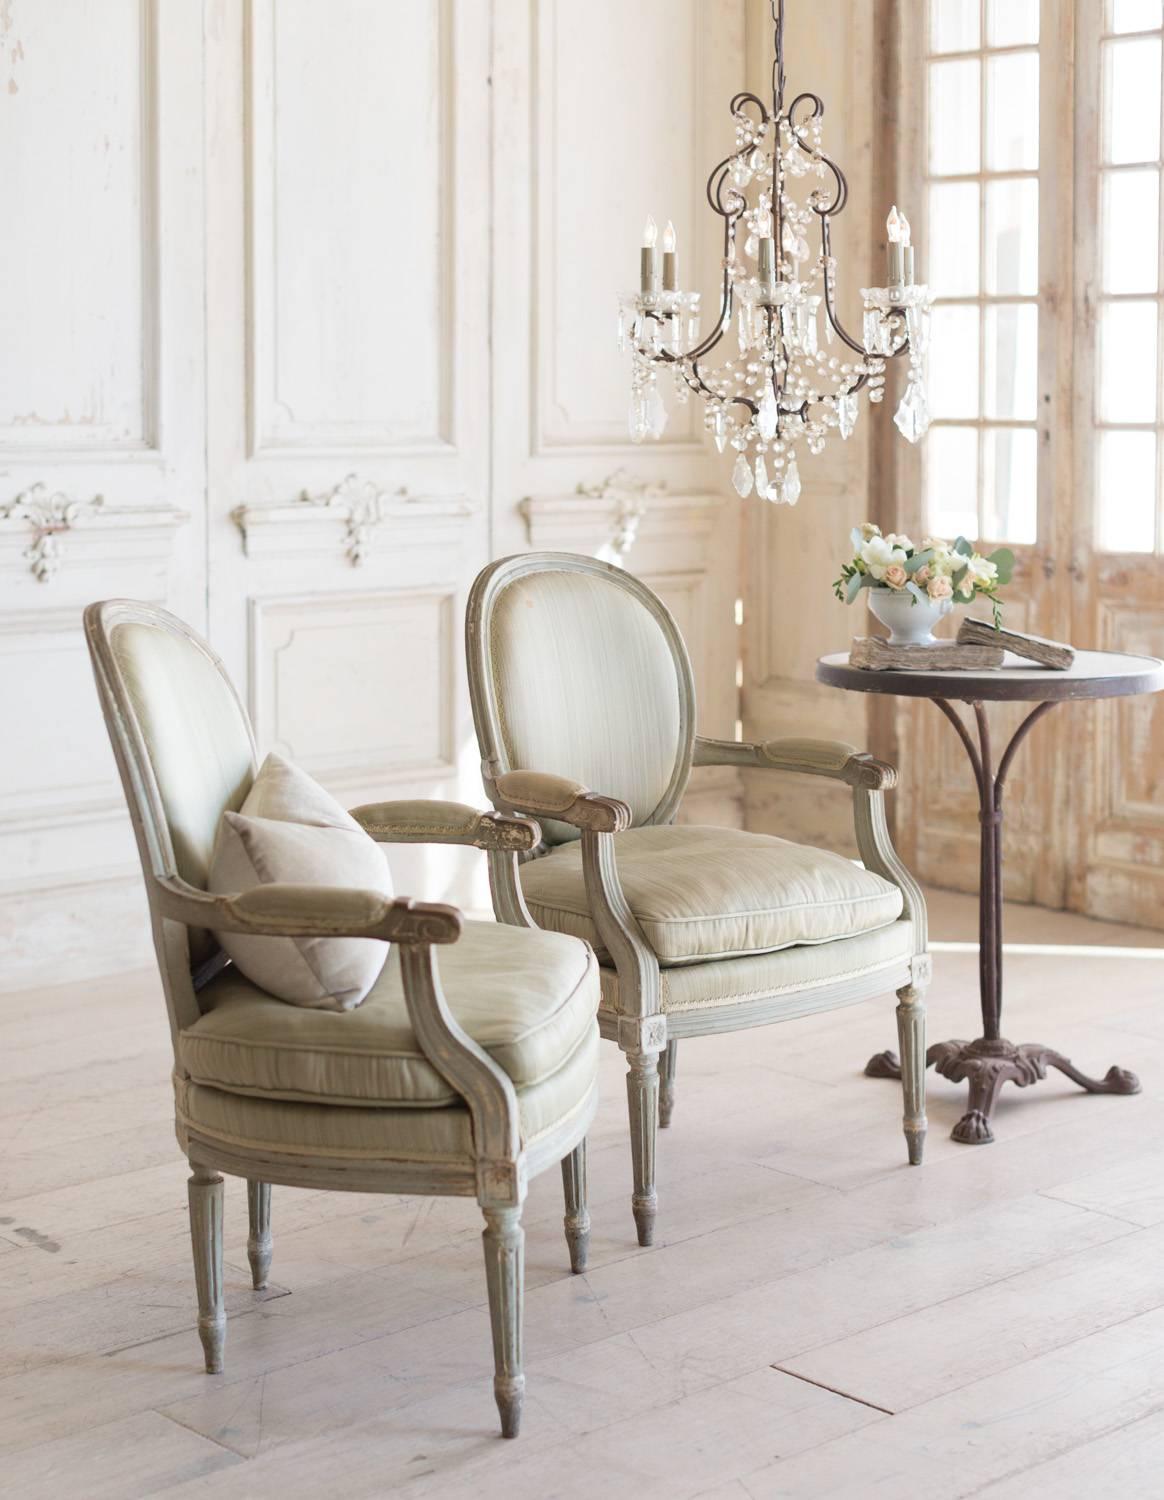 Sweet pair of antique armchairs in distressed Seafoam finish. The original, silky green fabric compliments the Louis XVI design. Simple column legs and small rosettes sit upon the legs. A beautiful addition to a dining or sitting area.